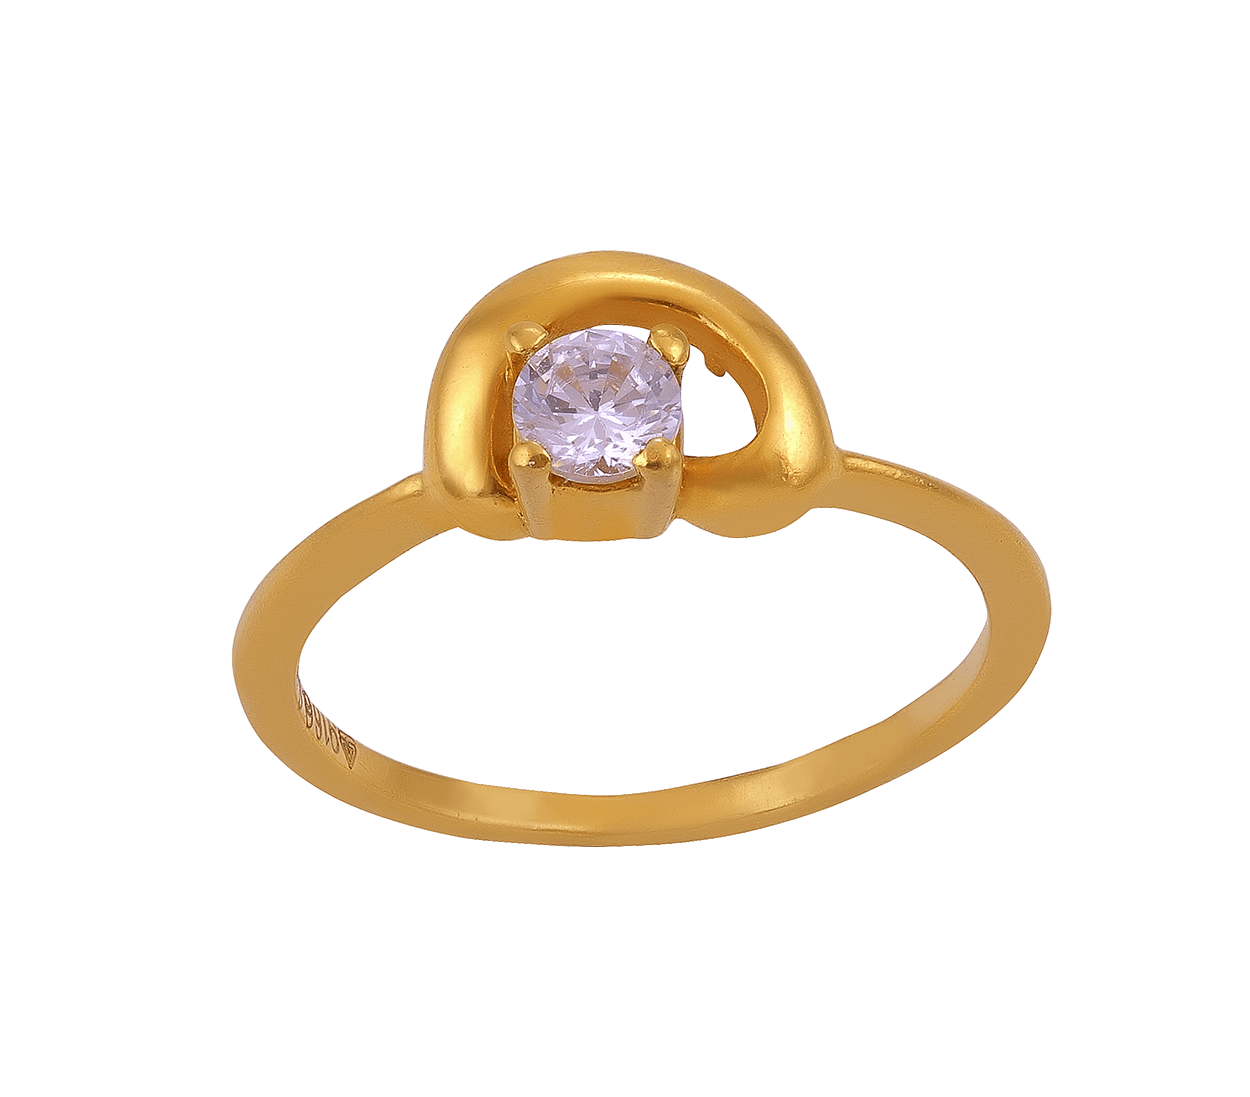 Buy Gold Jewellery Online | Beautiful Ring Designs